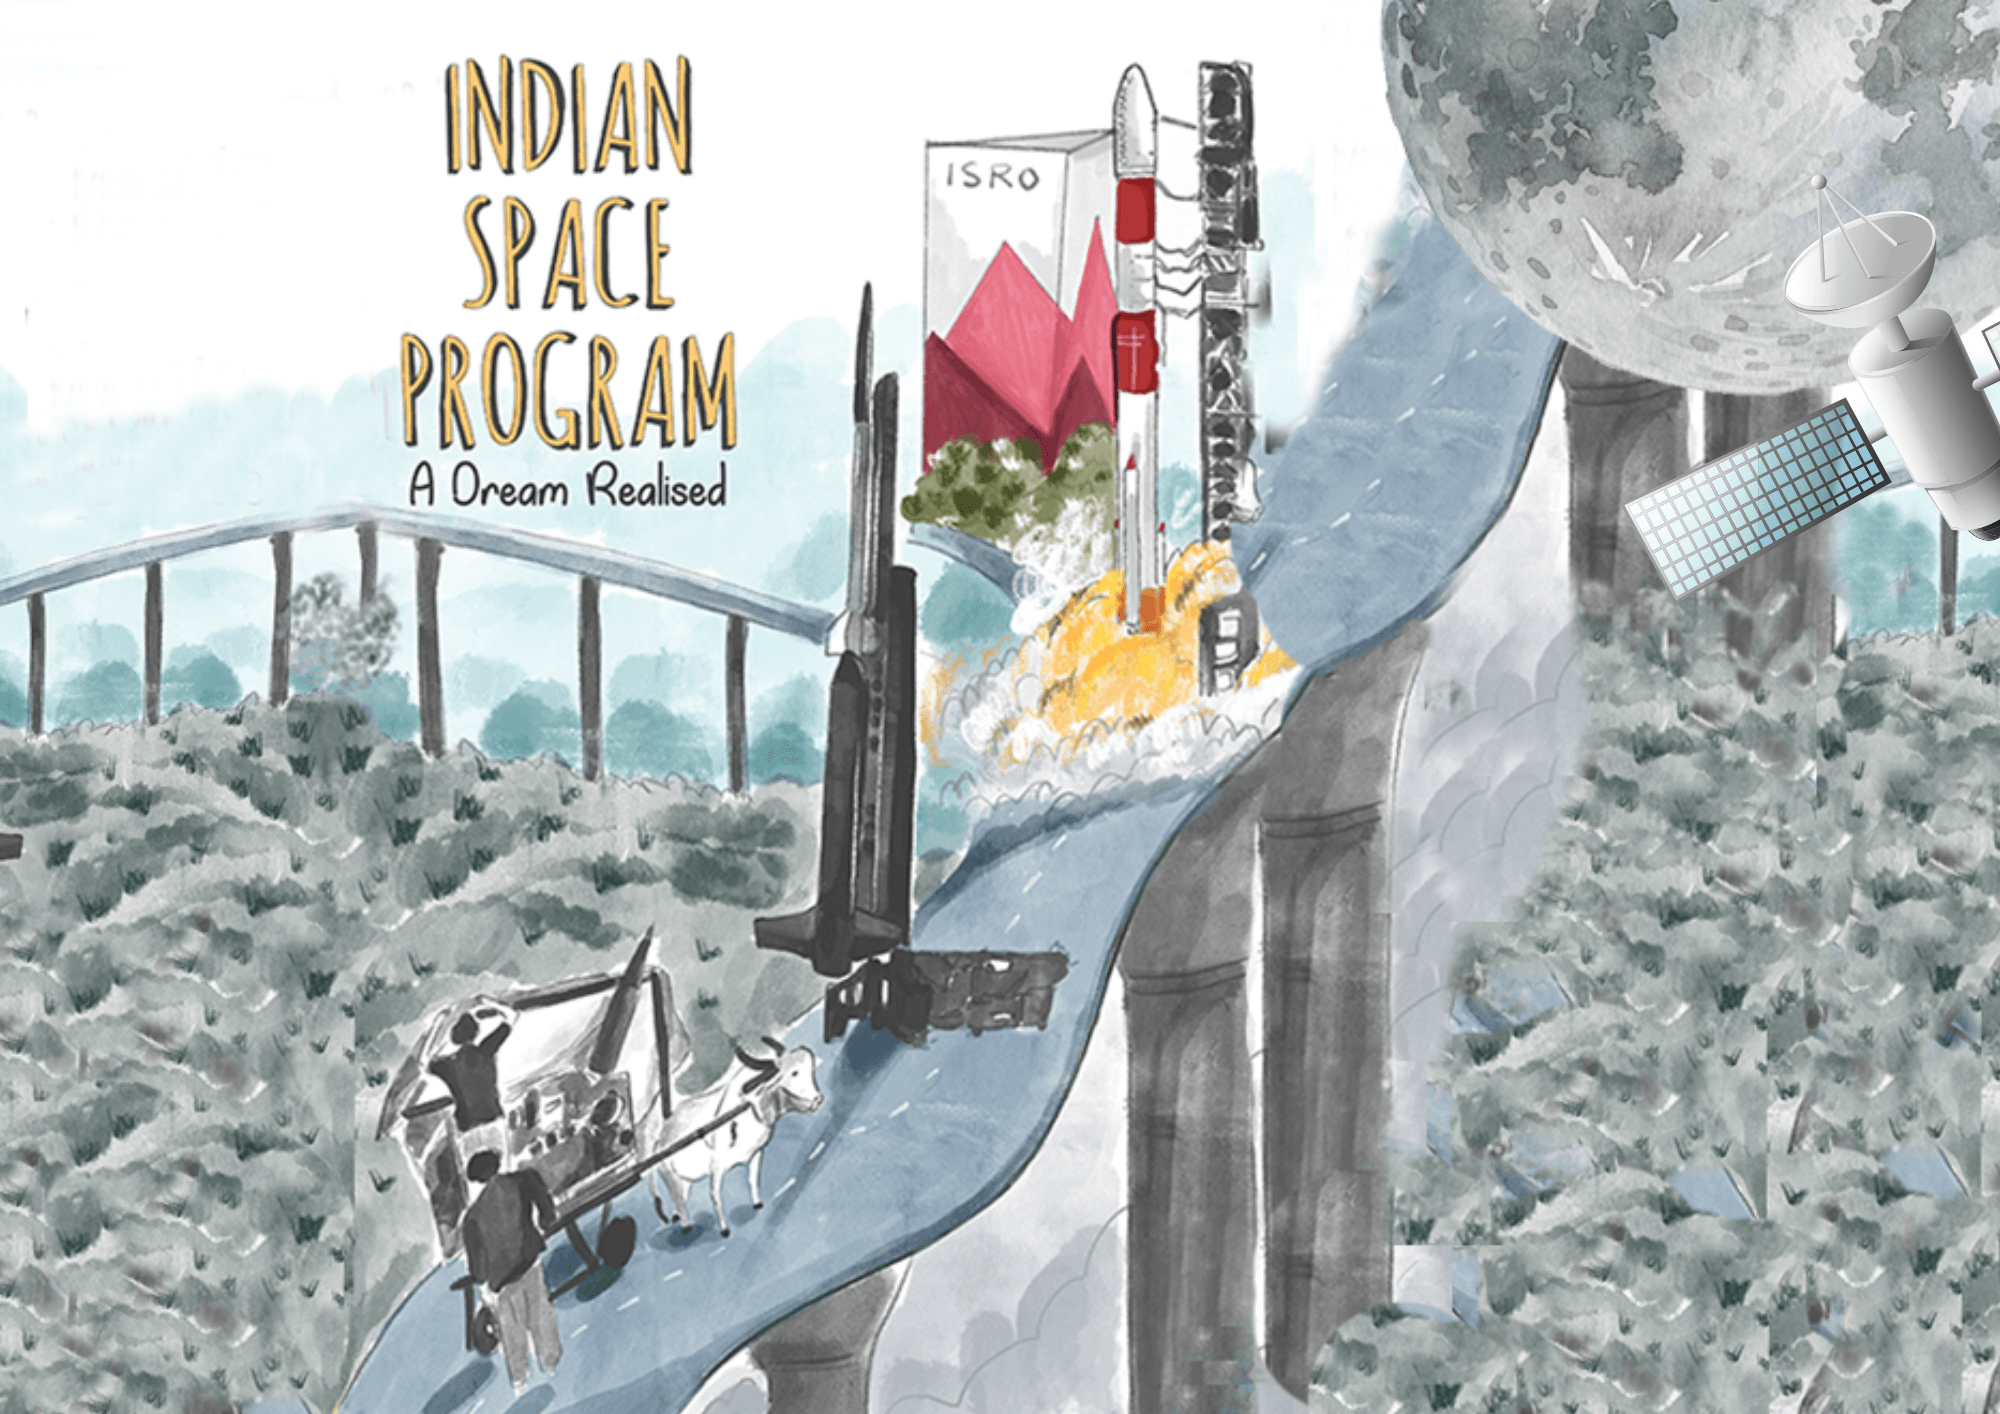 Indian Space Program - A dream realised